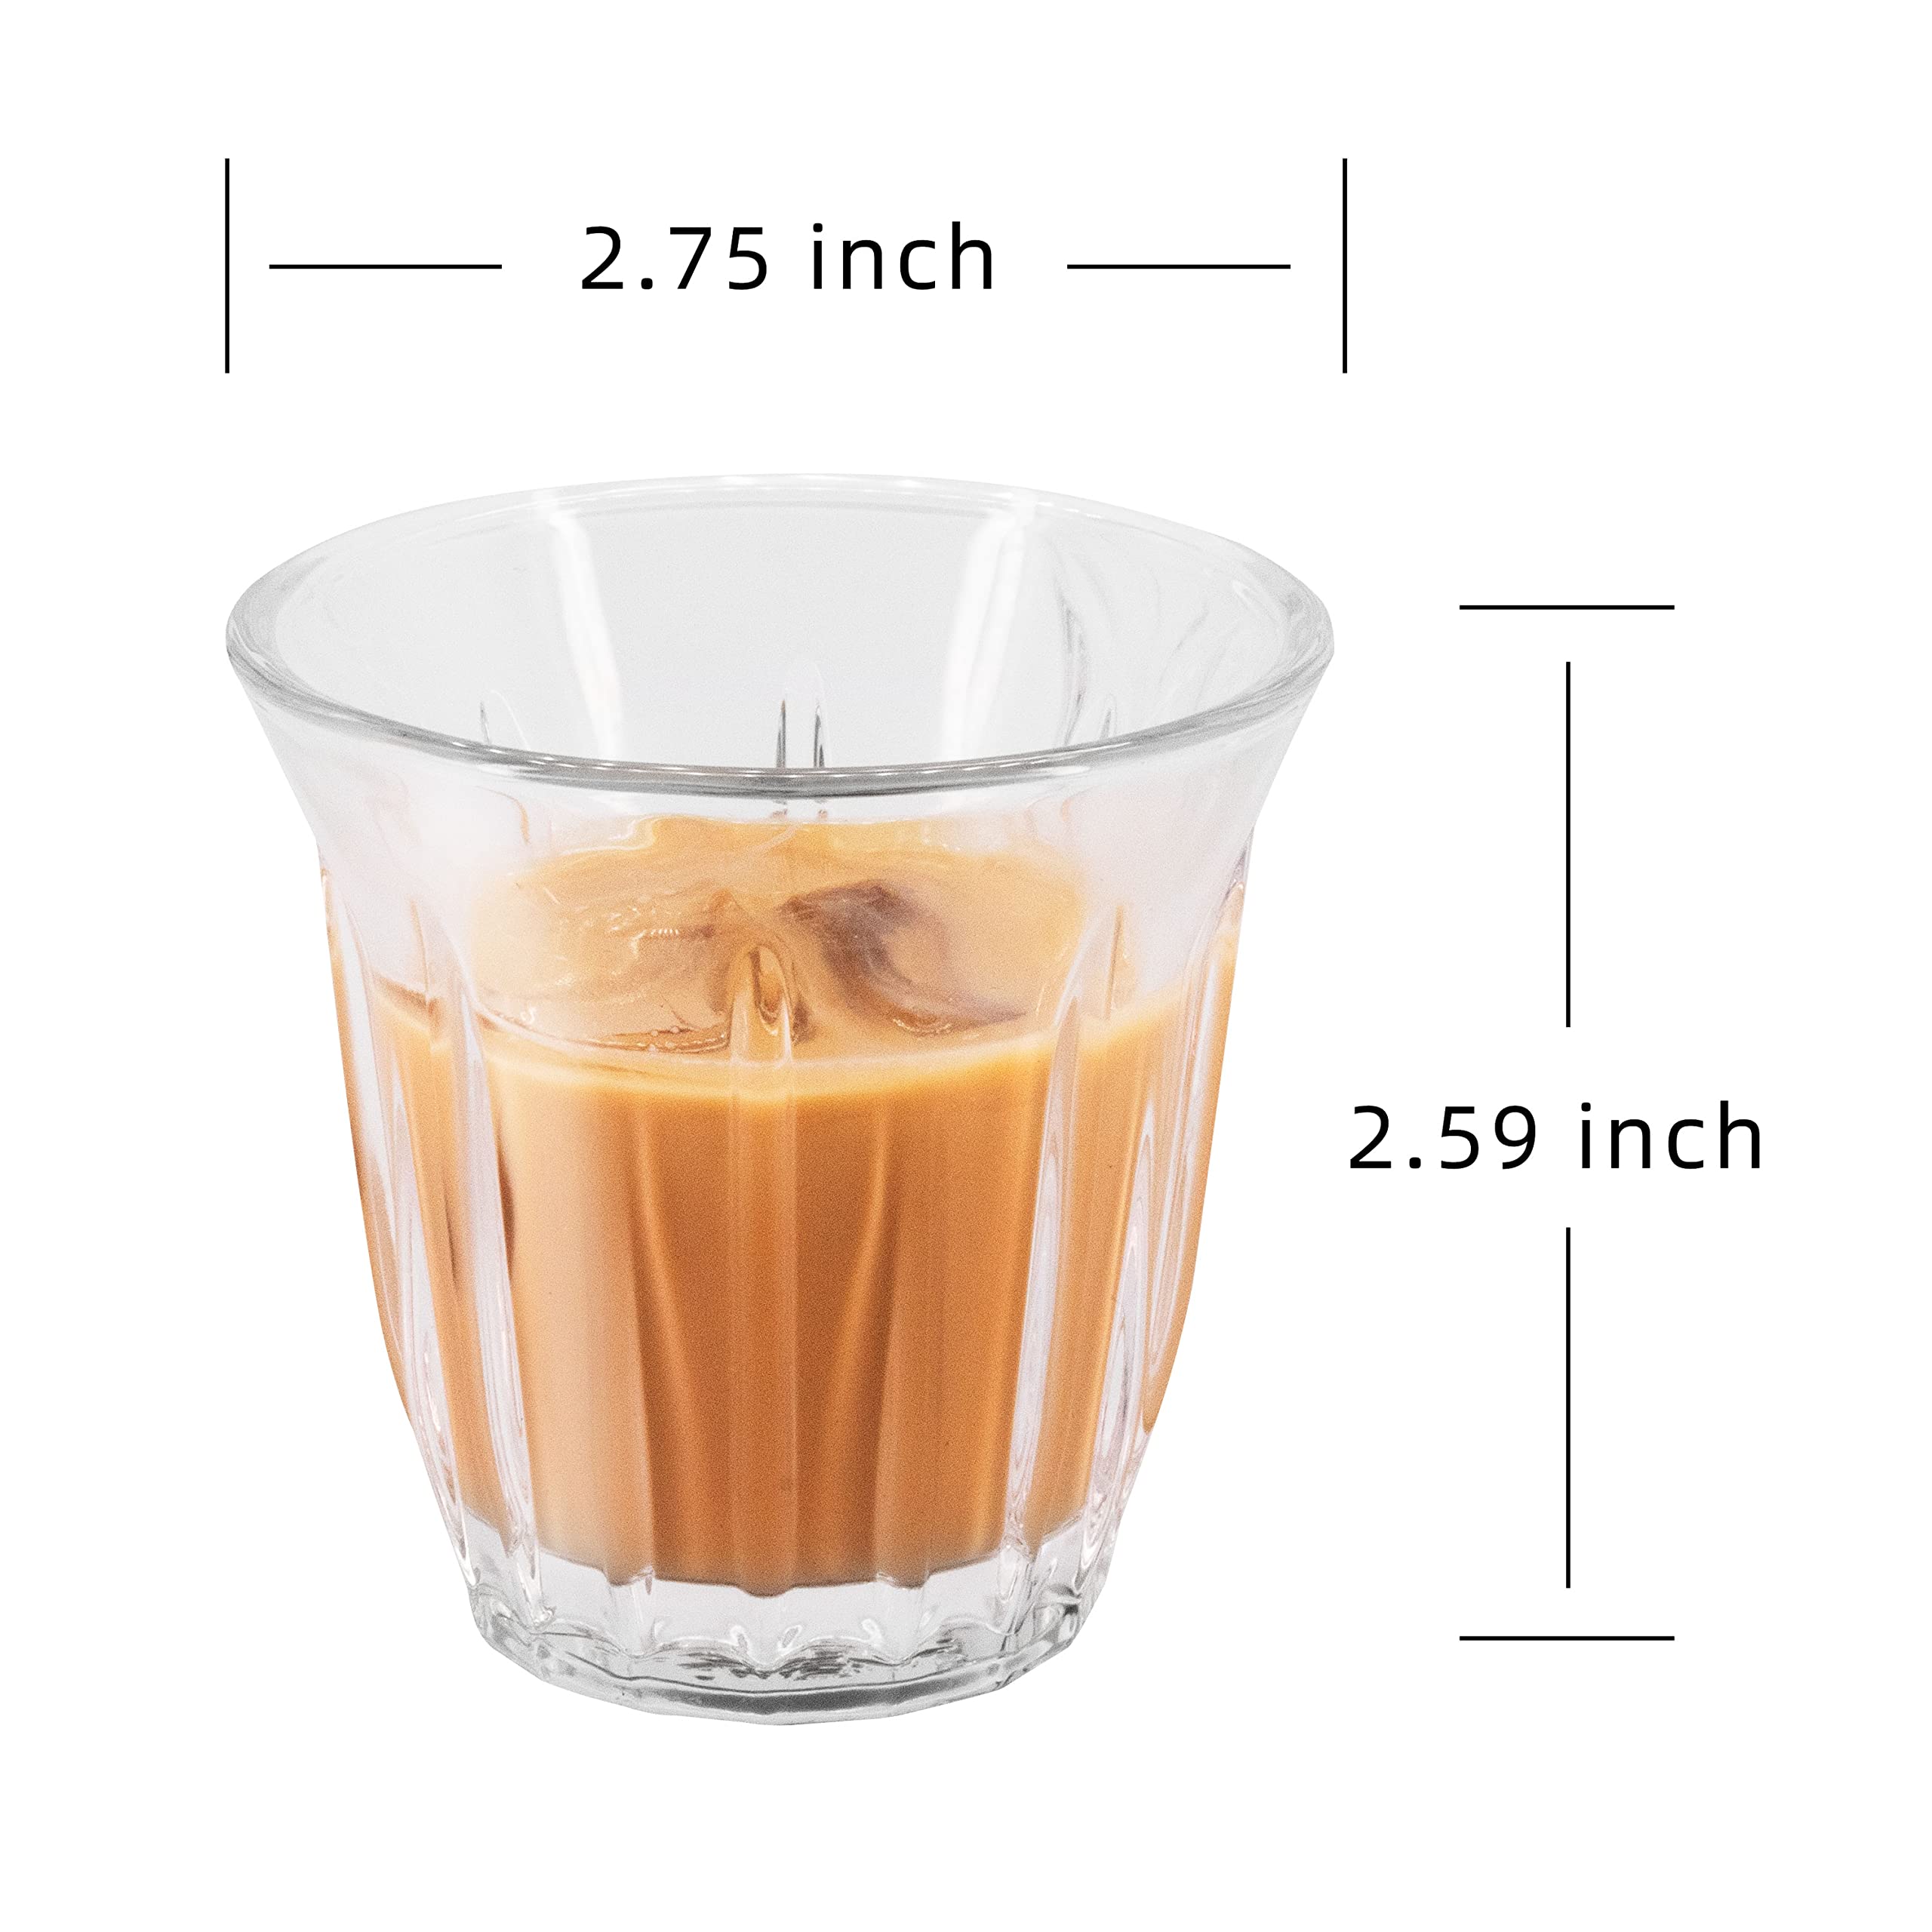 Aijohnny Espresso Cups Set of 2 Clear Glass Cups 3oz for Coffee/Milk, Coffee Mugs Insulated Shot Glasses Regular Espresso Accessories in Kitchen/Office/Bar, Easy to Clean (3oz-2 Pack)